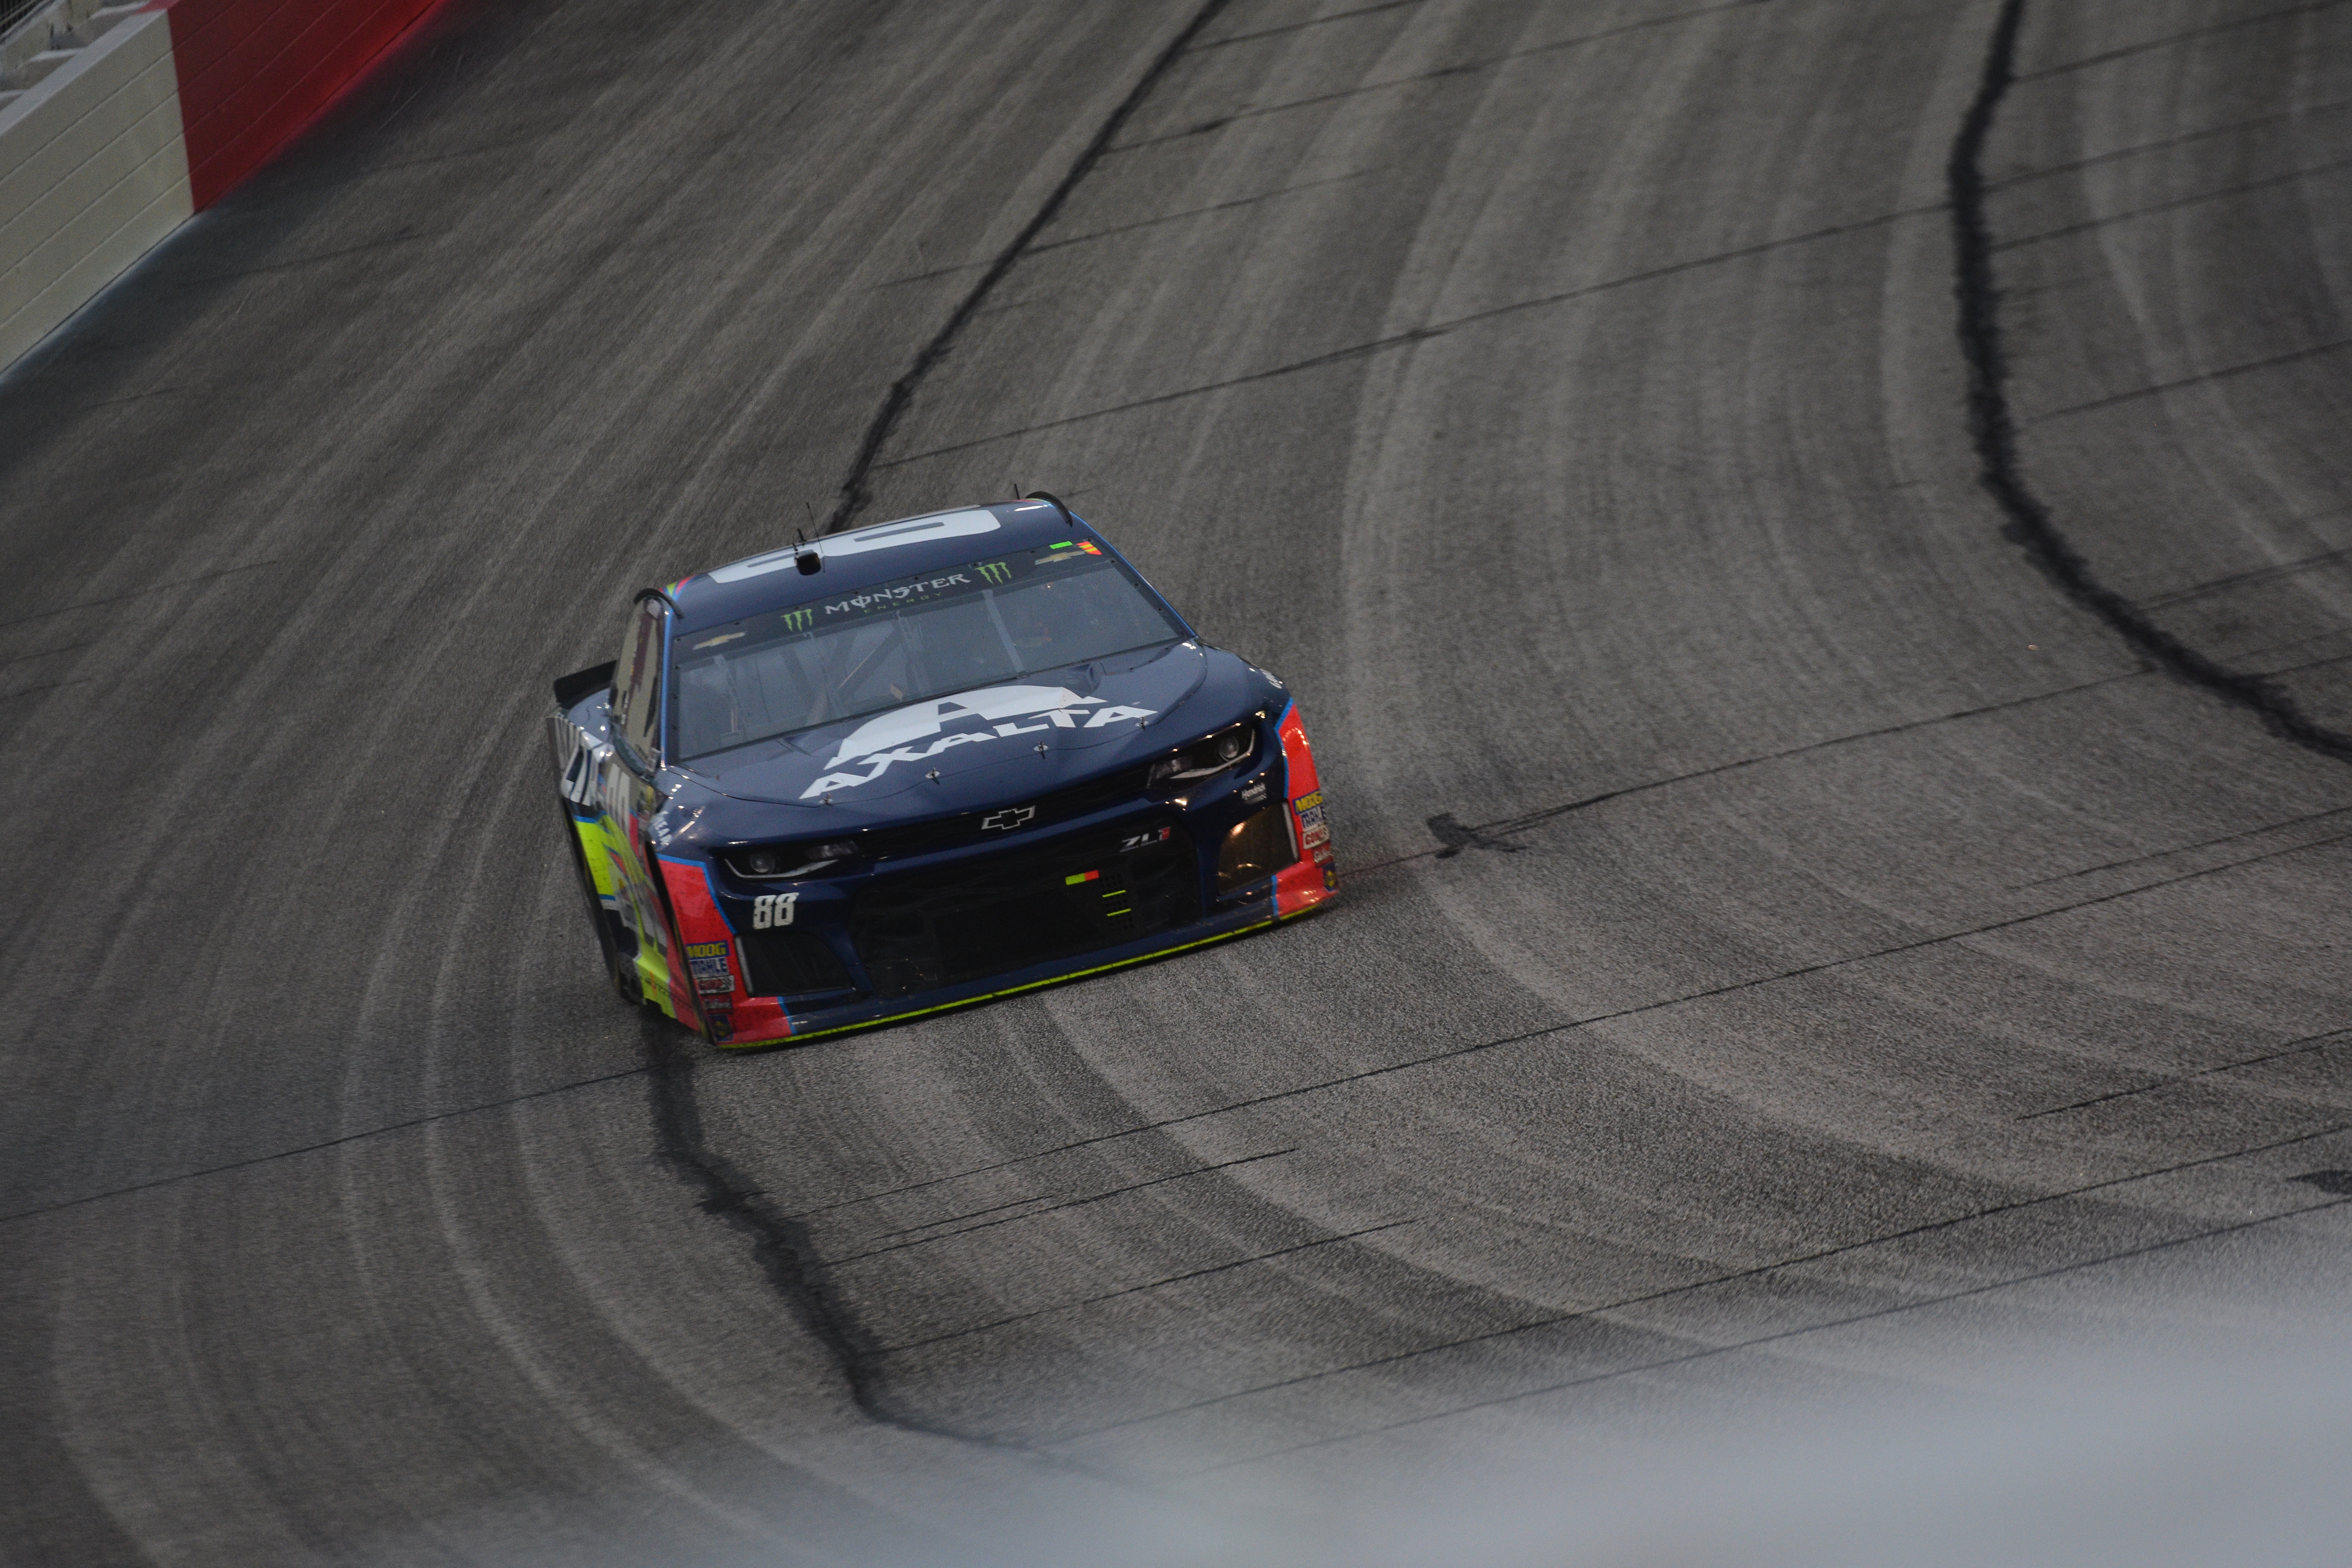 Relentless, Bowman searches for the best line at Atlanta. (Photo Credit: Zach Darrow/TPF)